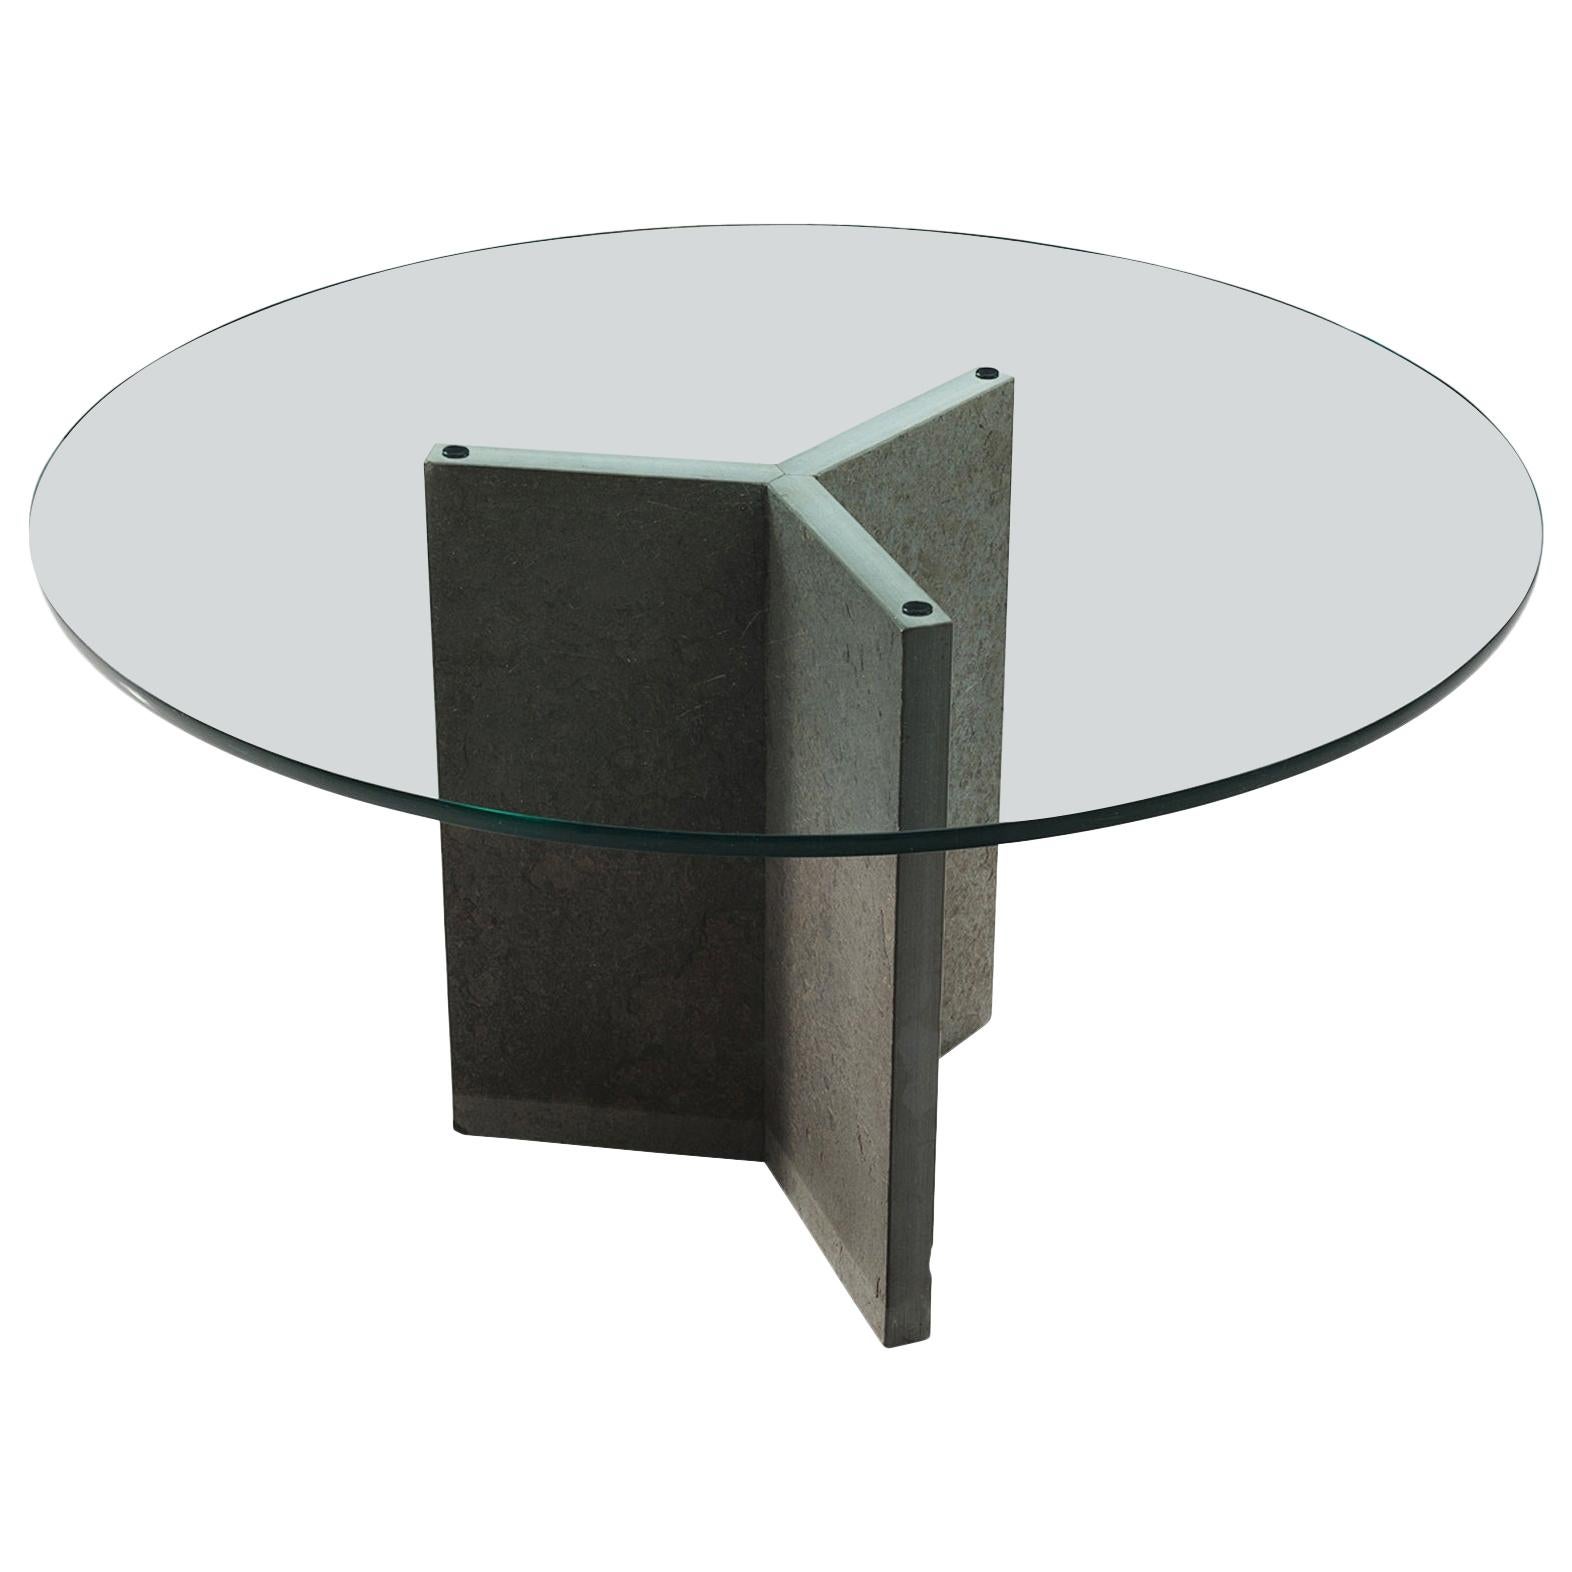 Italian Pedestal Center Table with Stone and Glass